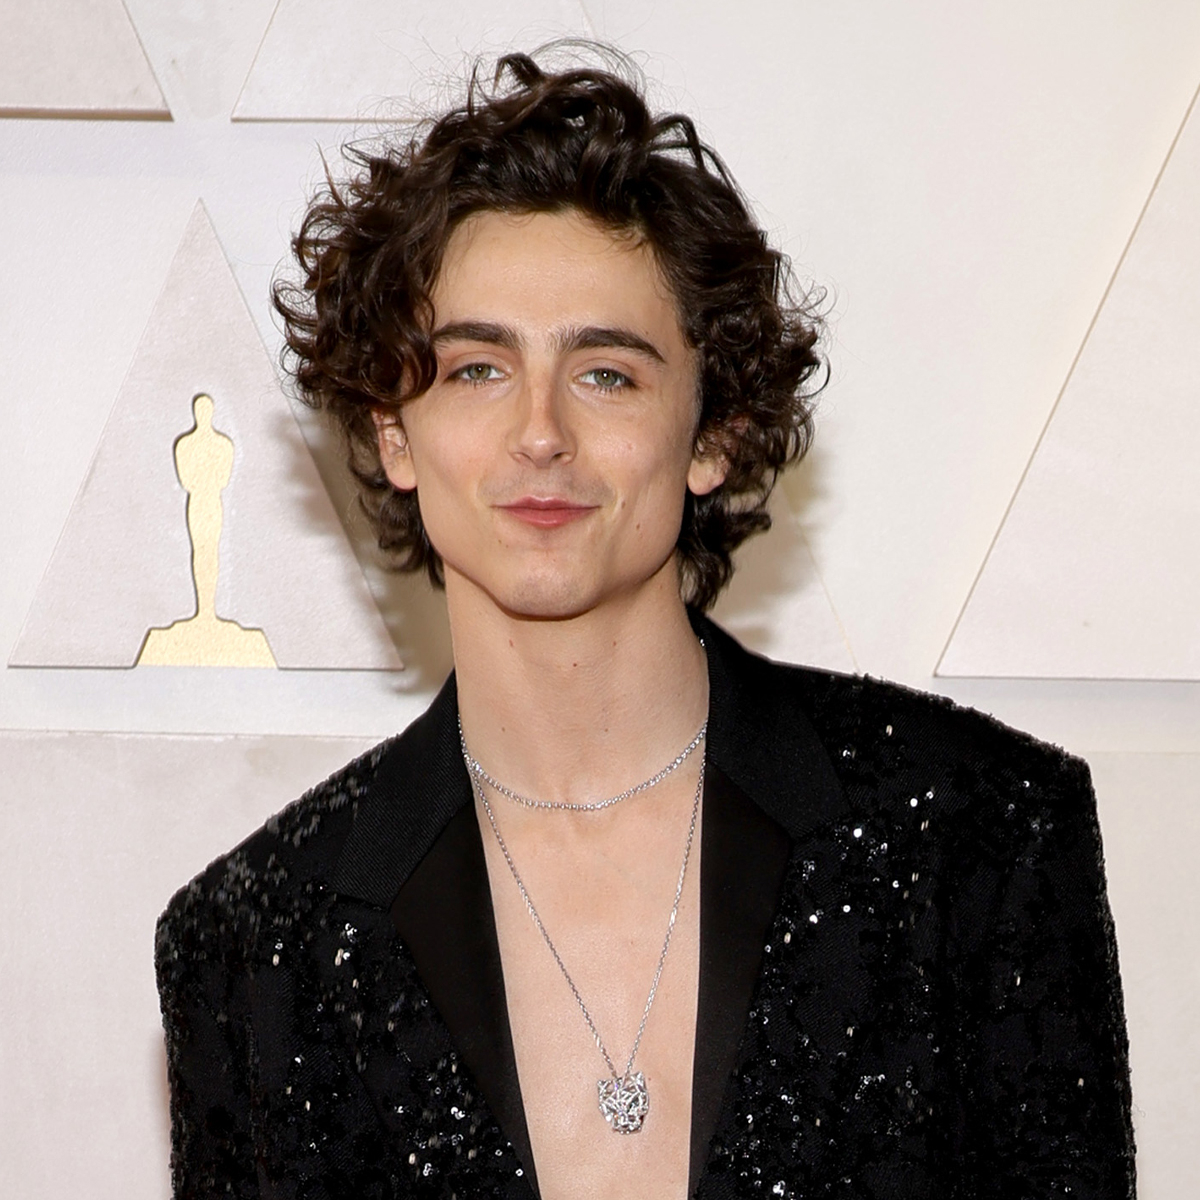 Timothee Chalamet Teams Up With Kid Cudi For Out of This World TV series Entergalactic